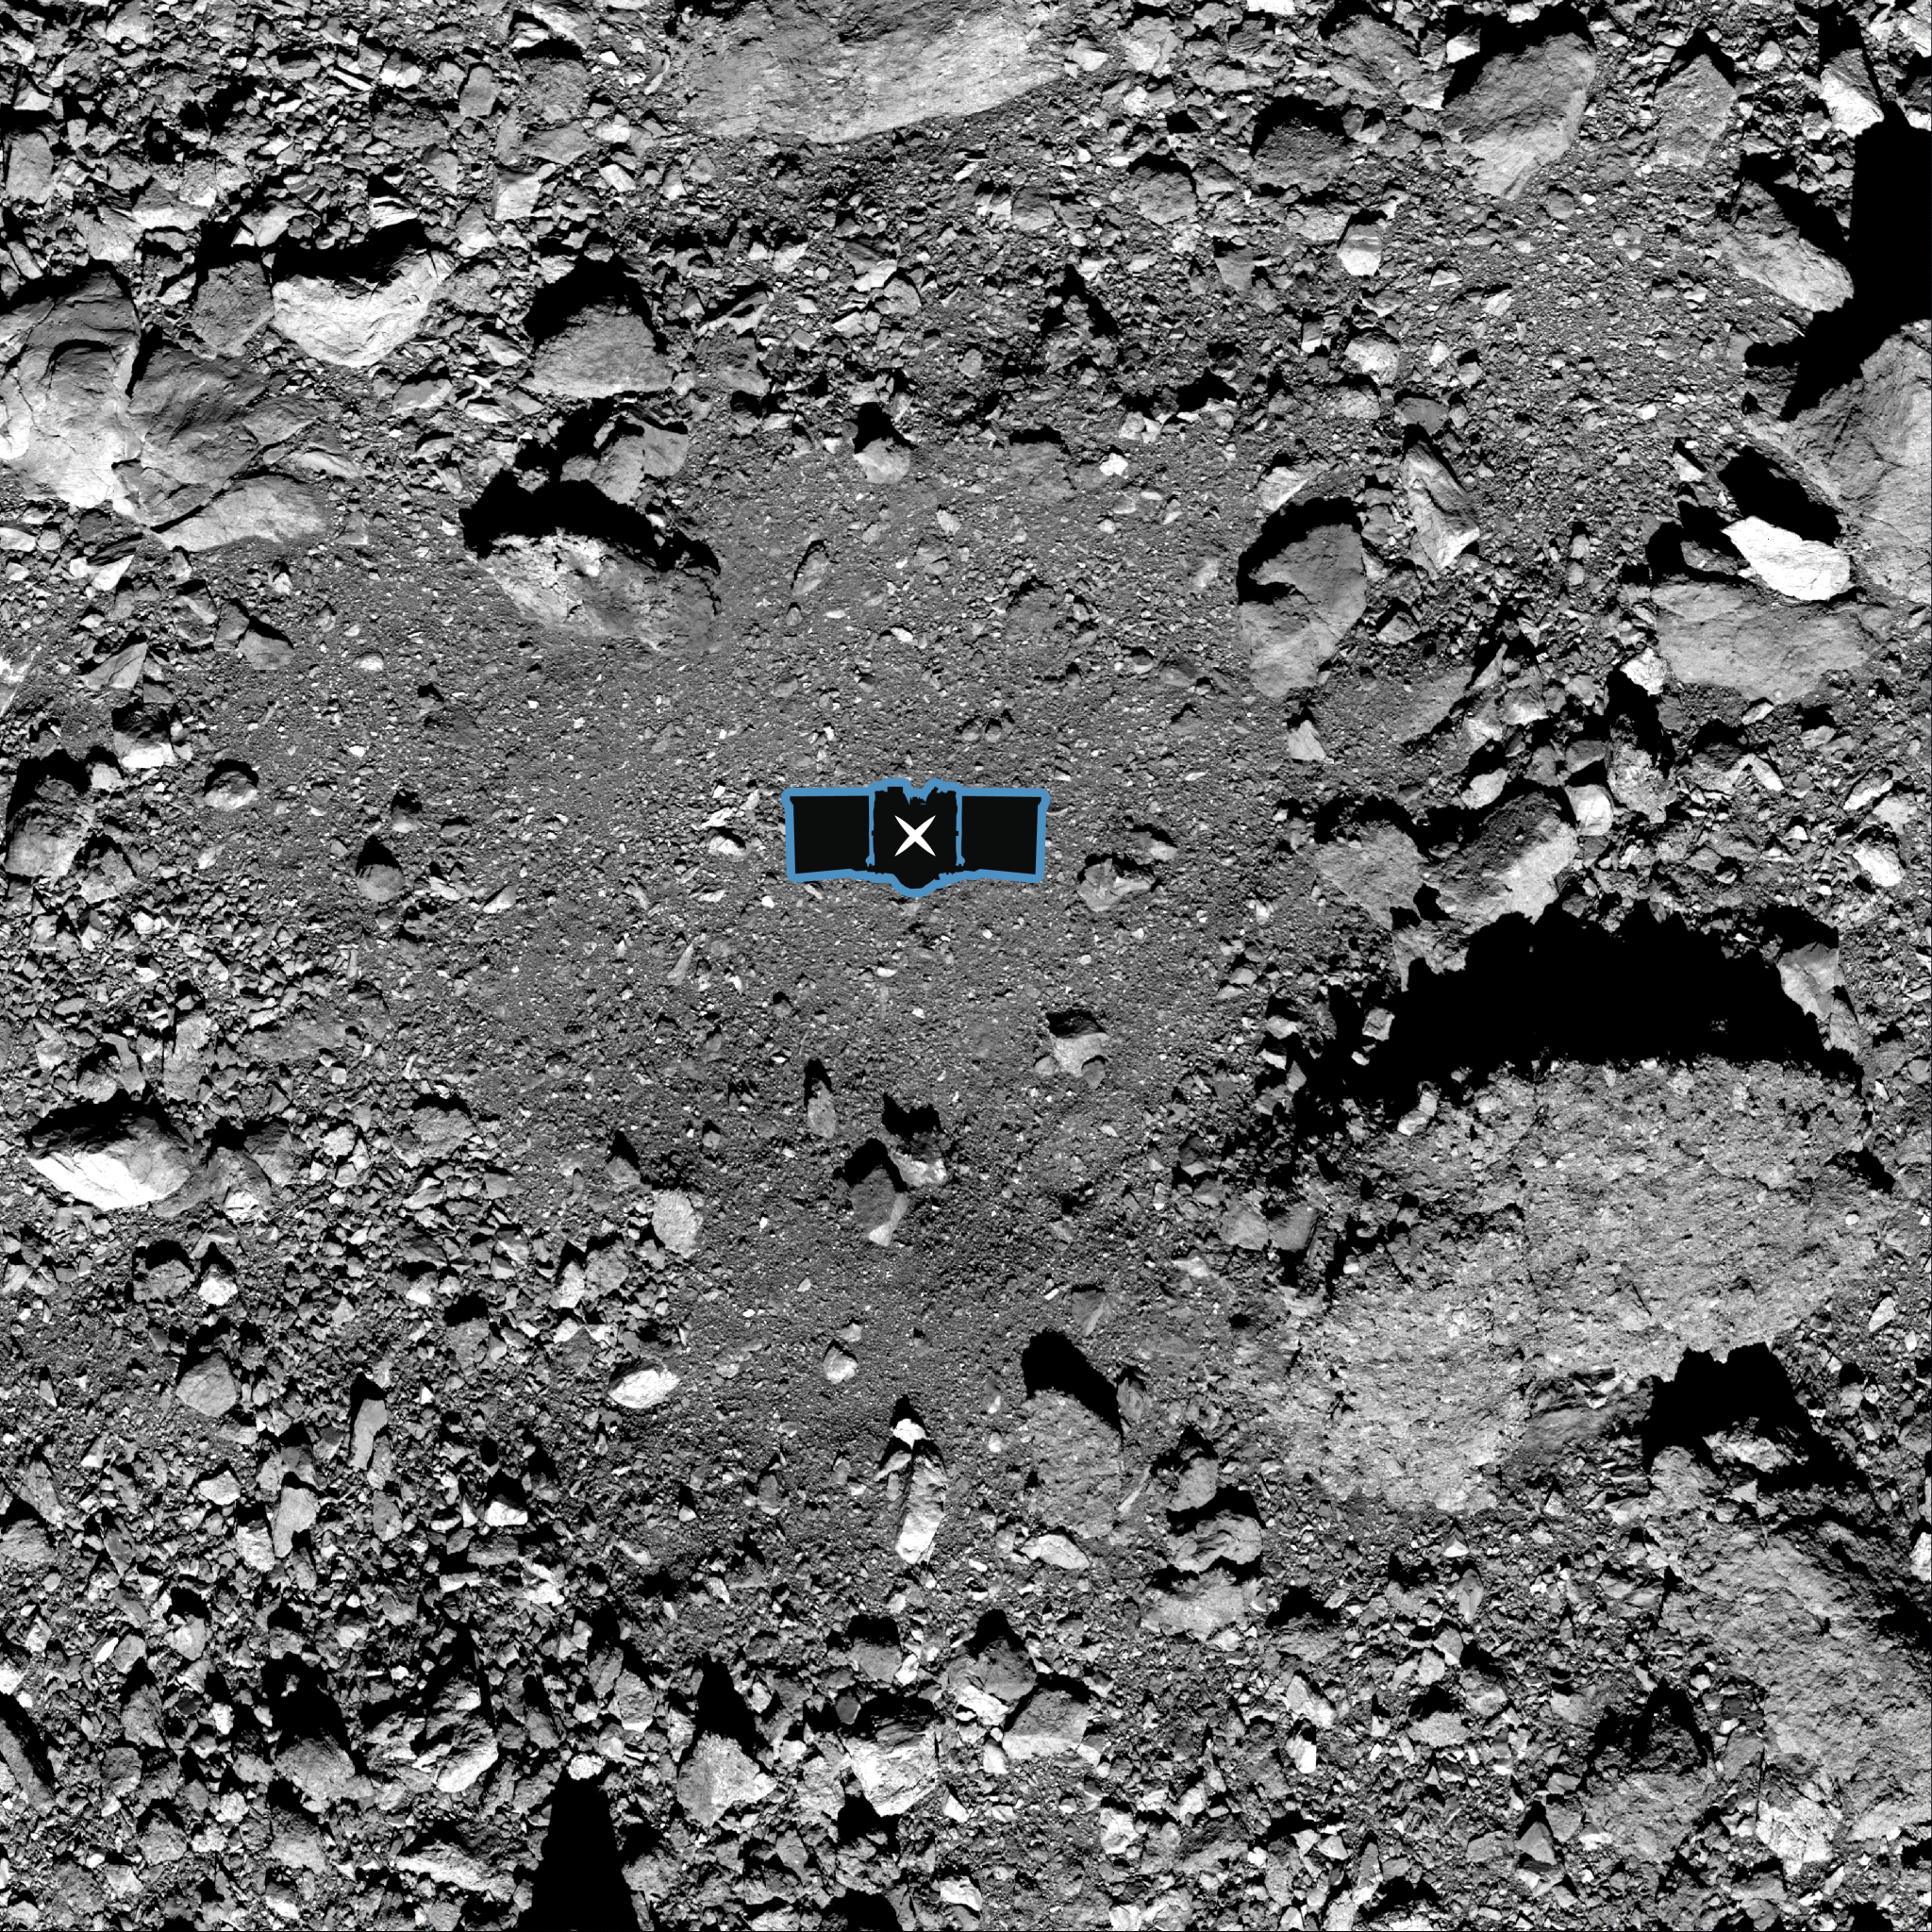 This image shows sample site Nightingale, OSIRIS-REx’s primary sample collection site on asteroid Bennu.